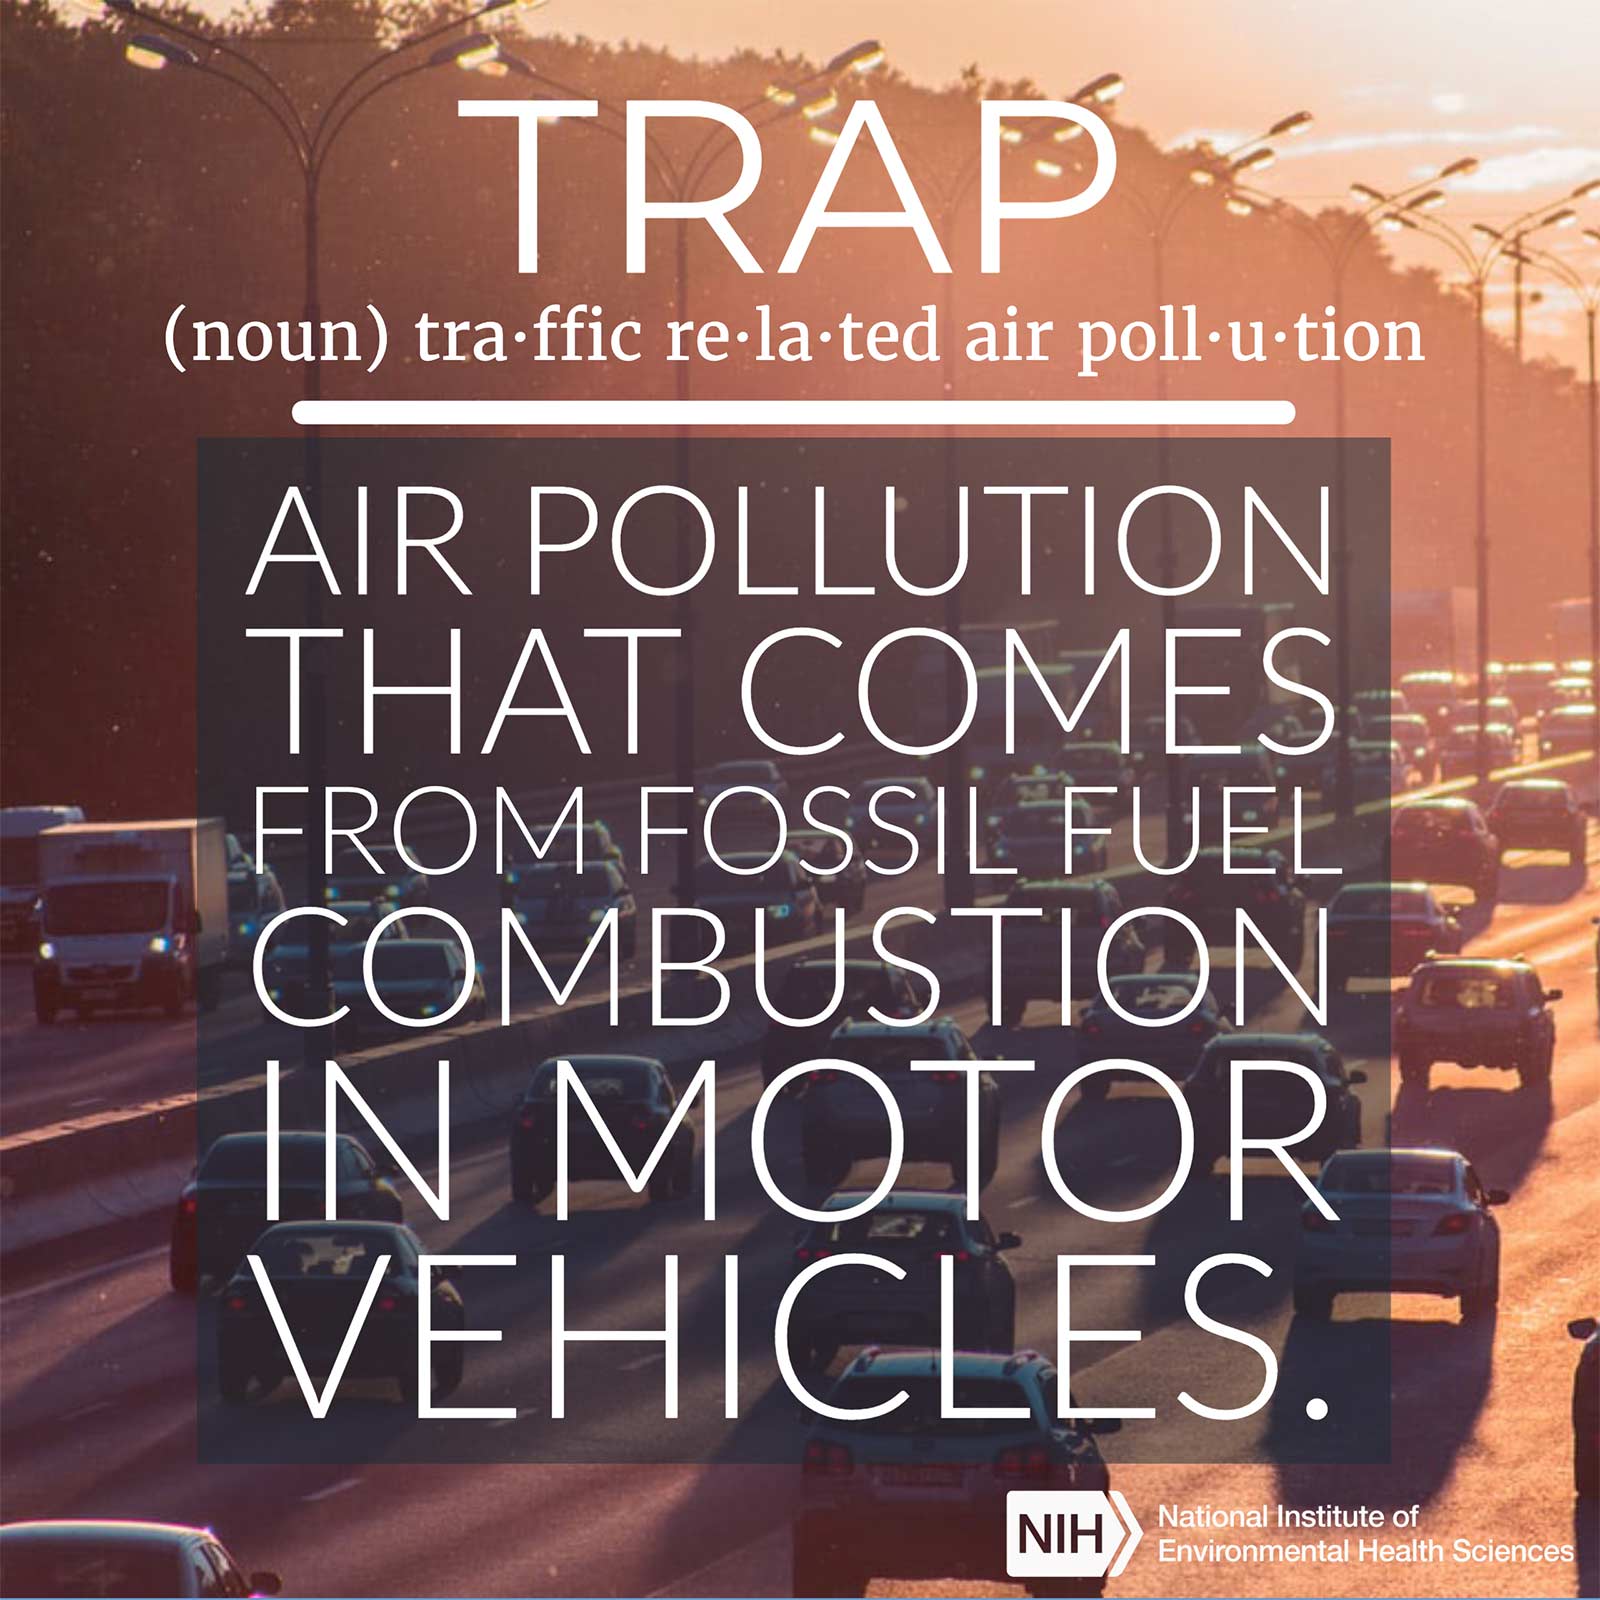 TRAP (noun) traffic related air pollution defined as &#39;Air pollution that comes from fossil fuel combustion in motor vehicles.&#39;